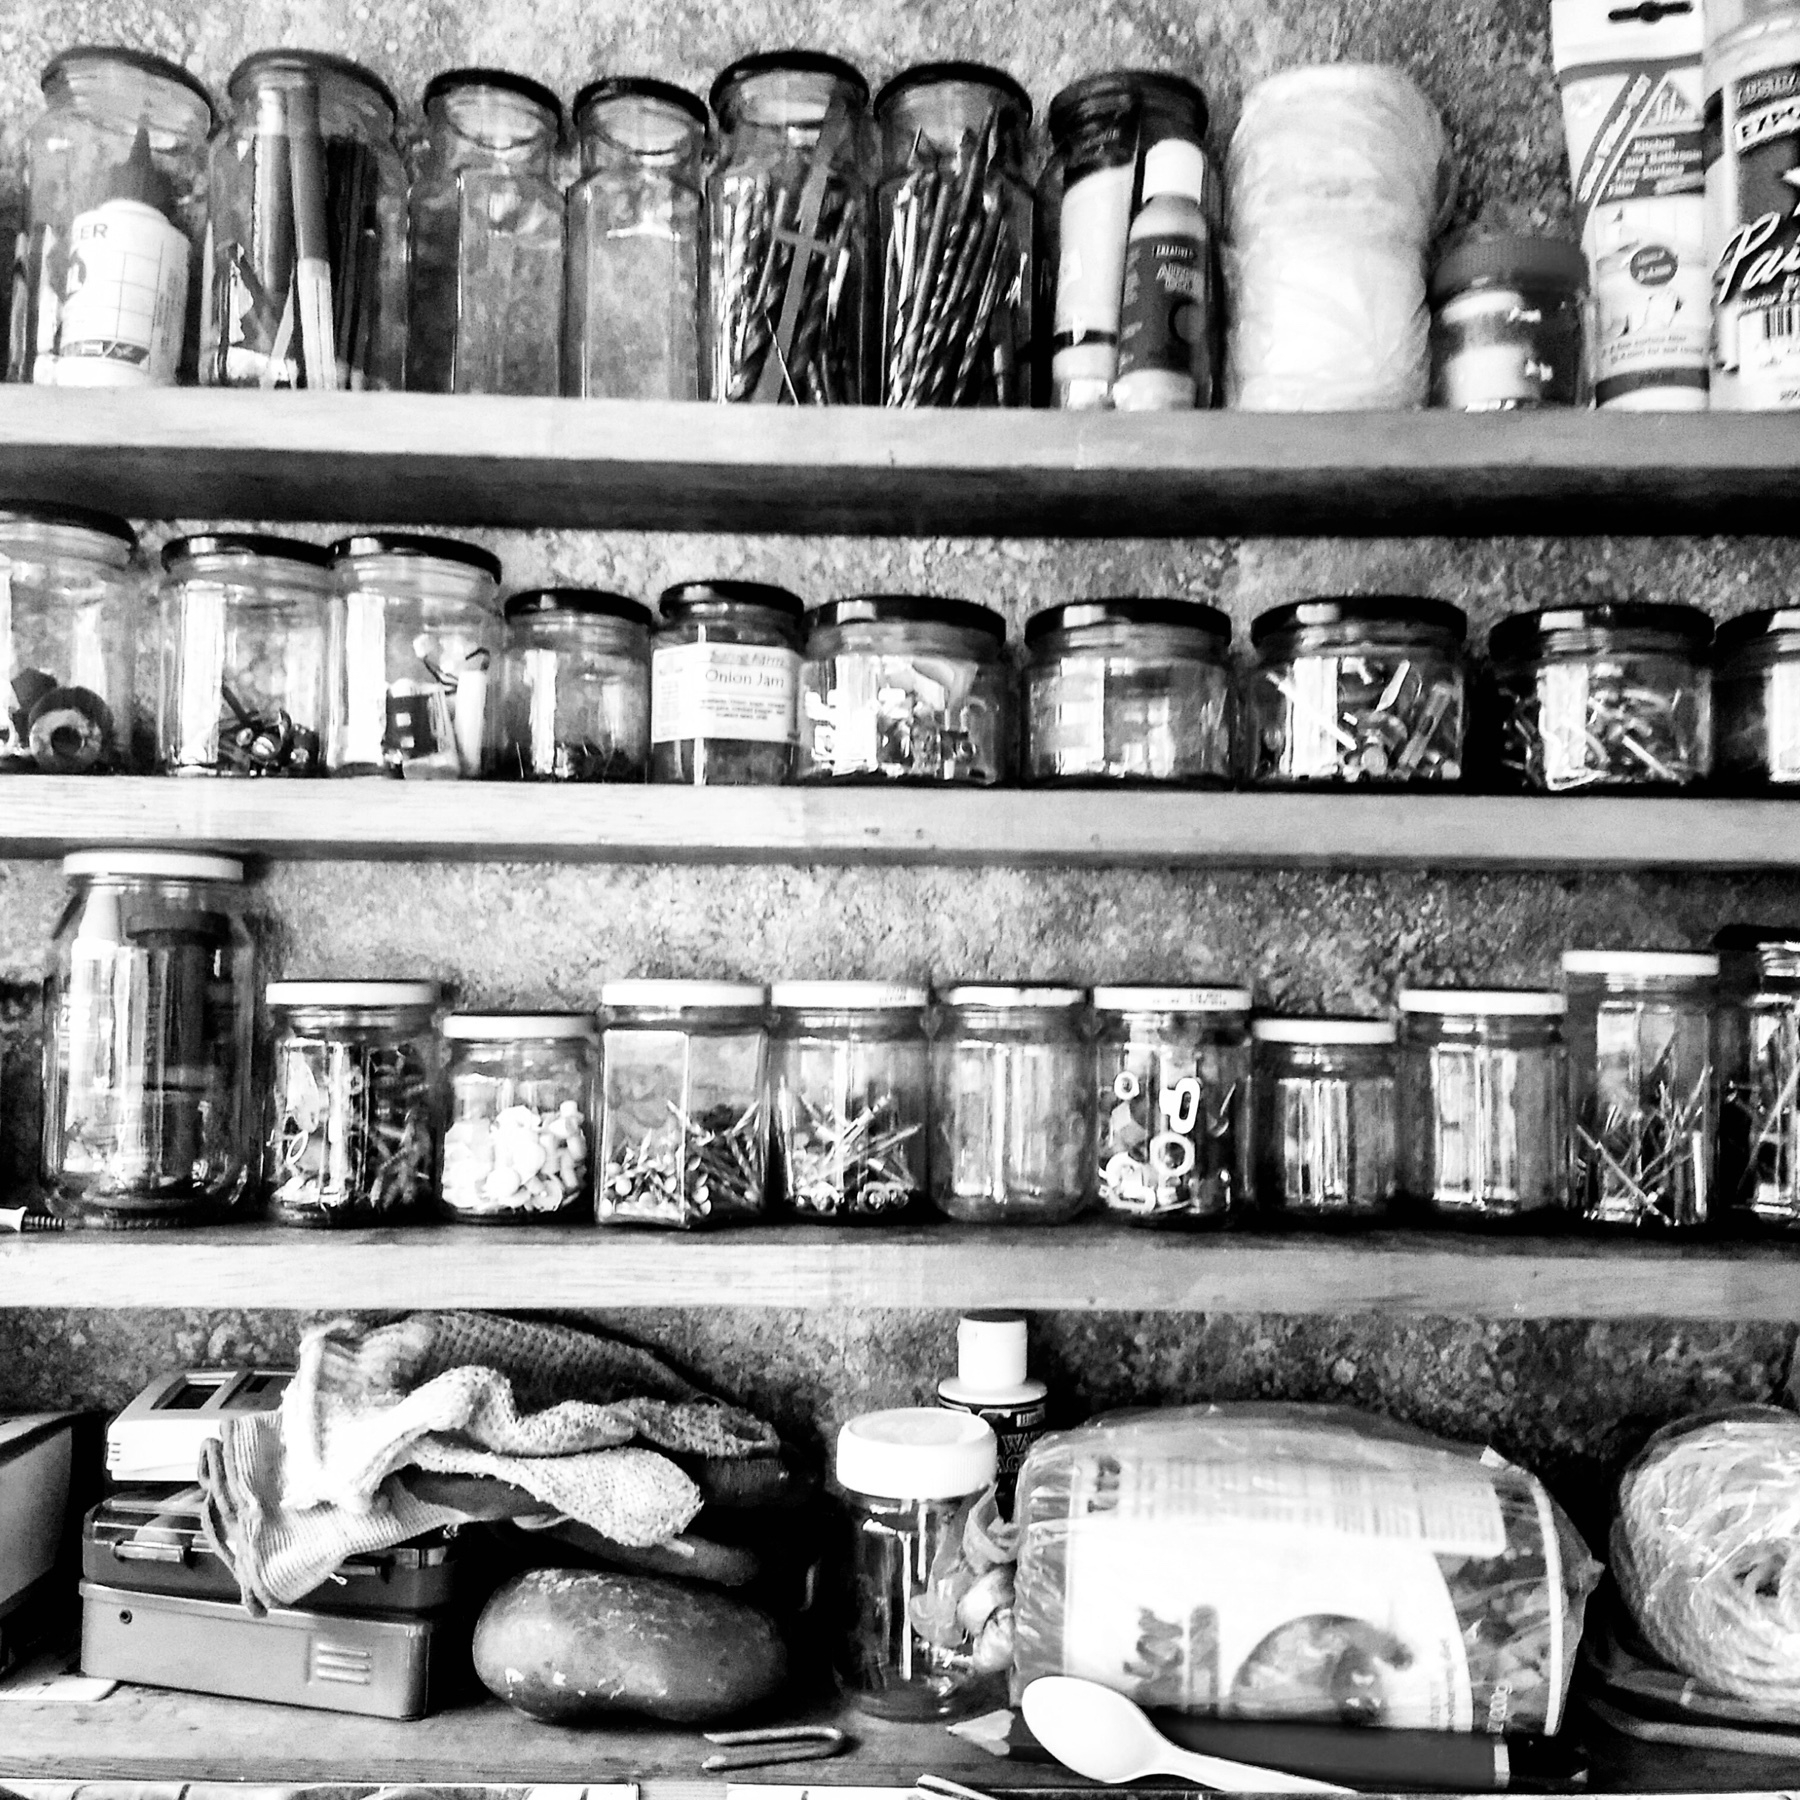 A black and white image of a set of shelves with jars of screws, nuts and bolts.